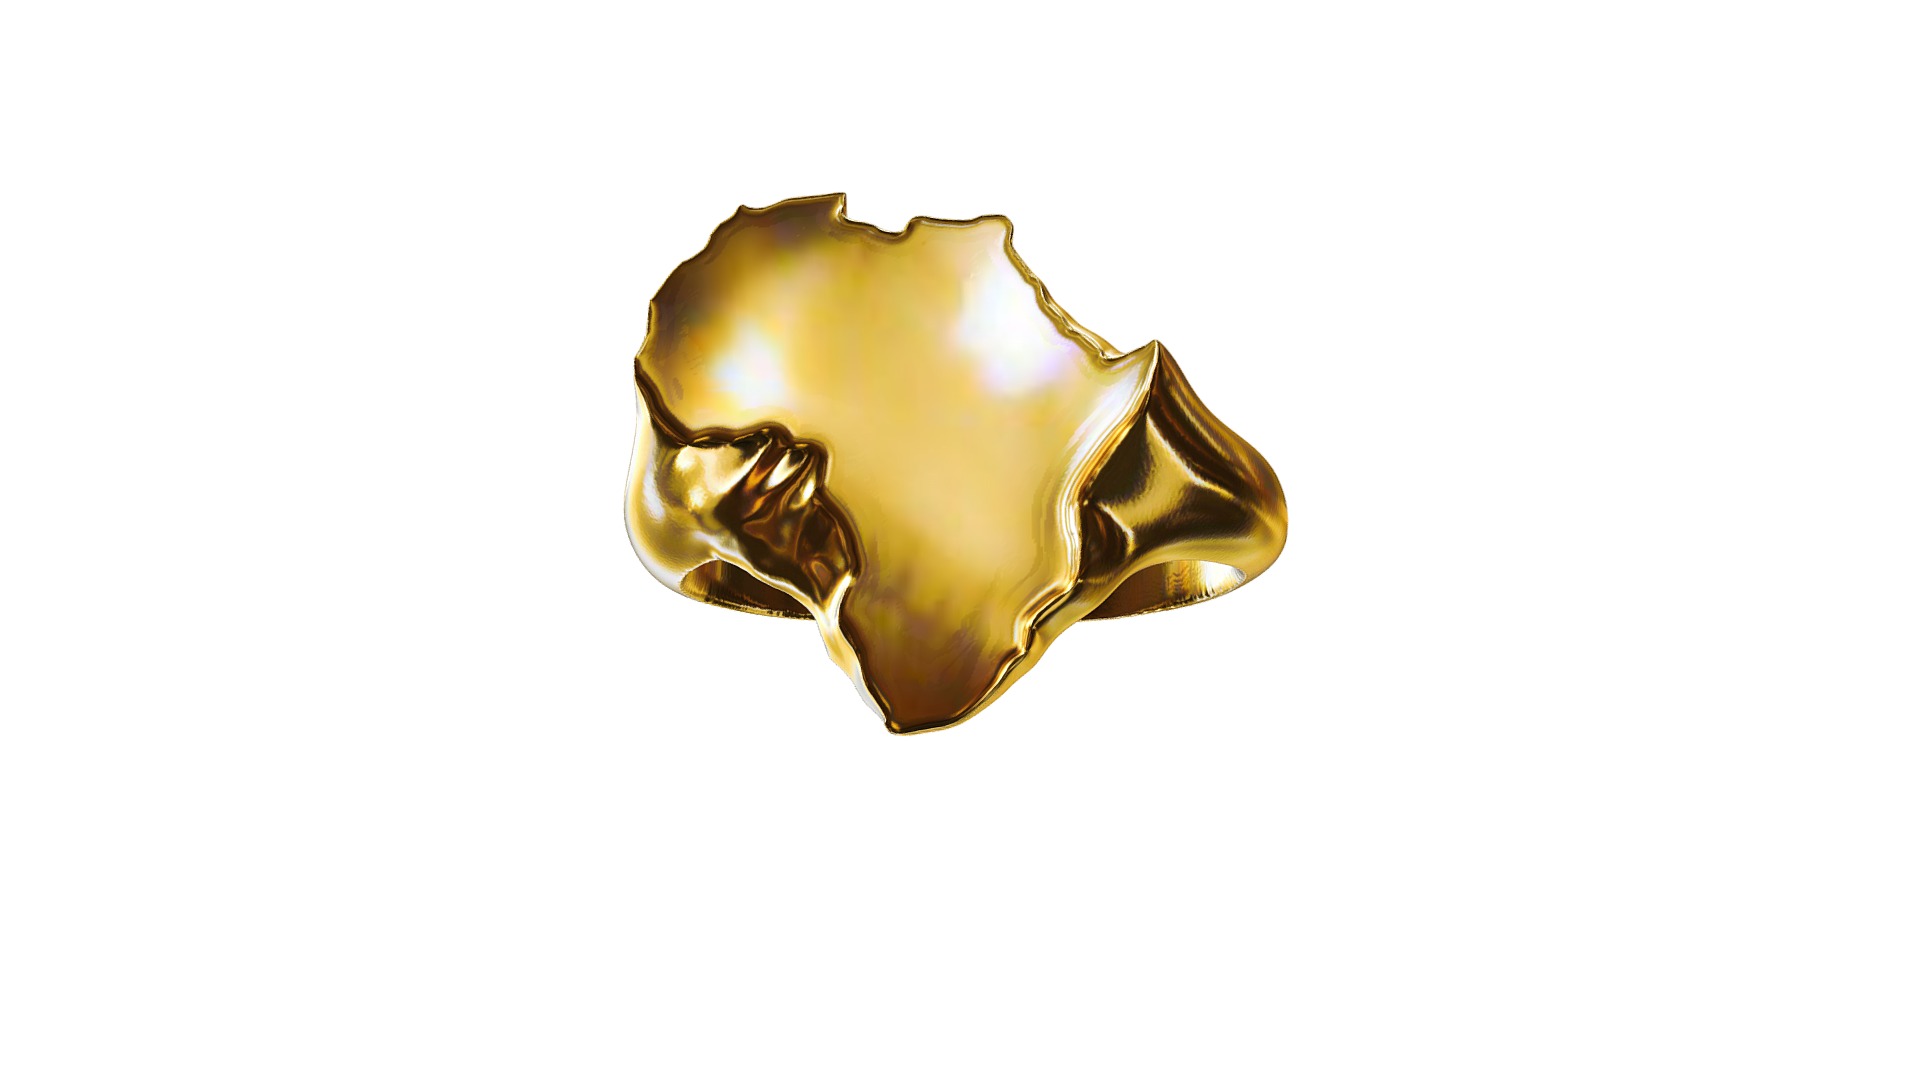 3D model Africa men’s ring - This is a 3D model of the Africa men's ring. The 3D model is about a snail on a white background.